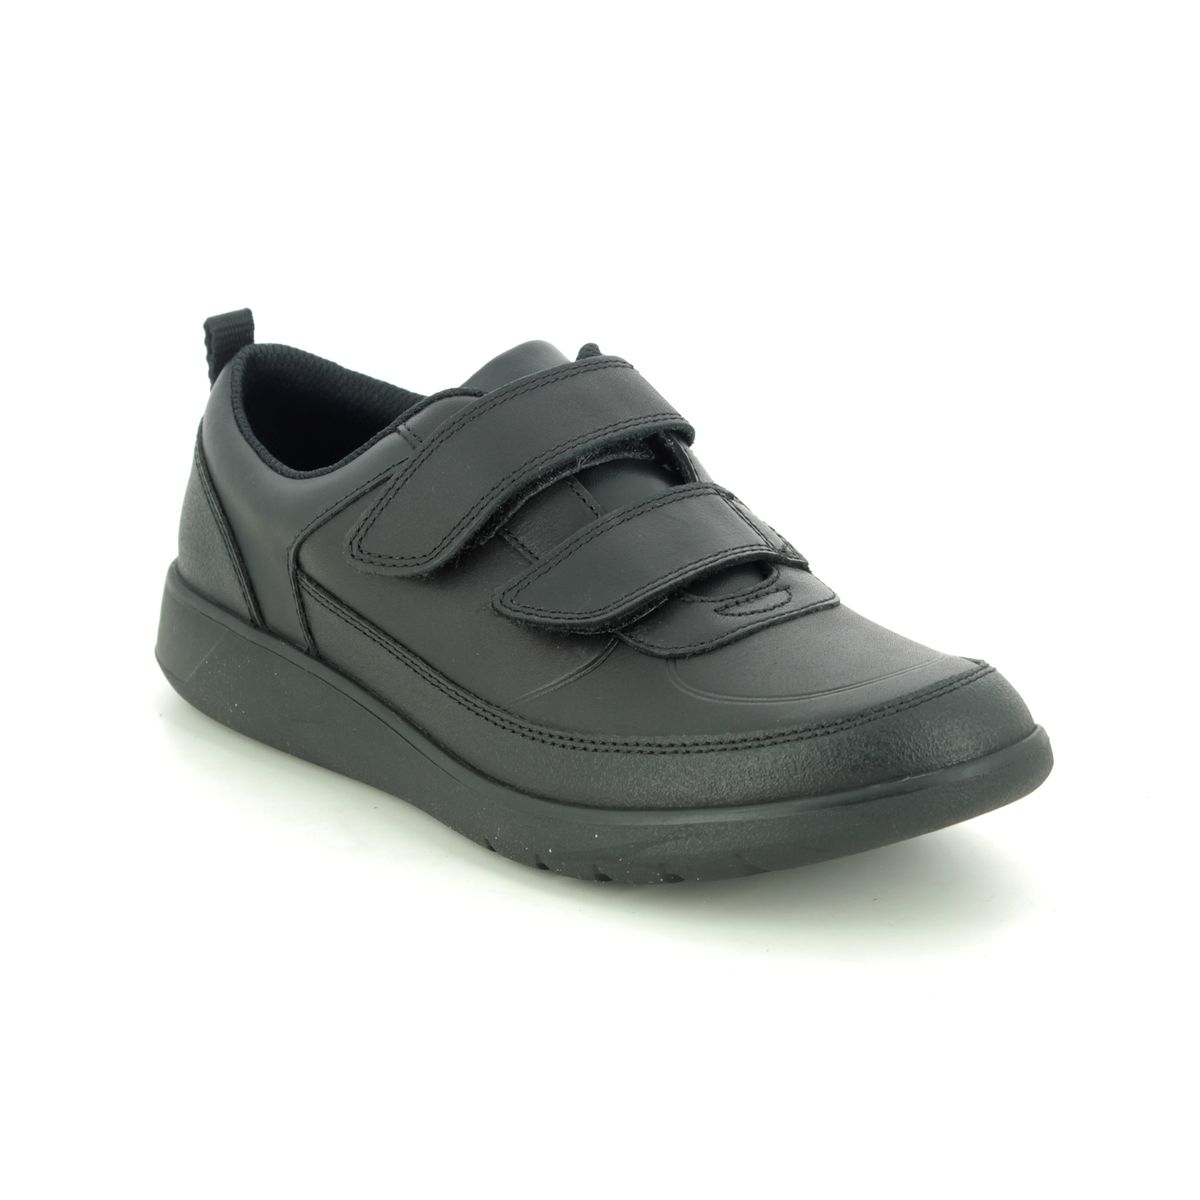 Clarks Scape Flare Y Black Leather Kids Boys Shoes 494096F In Size 5.5 In Plain Black Leather F Width Fitting Regular Fit For School For kids